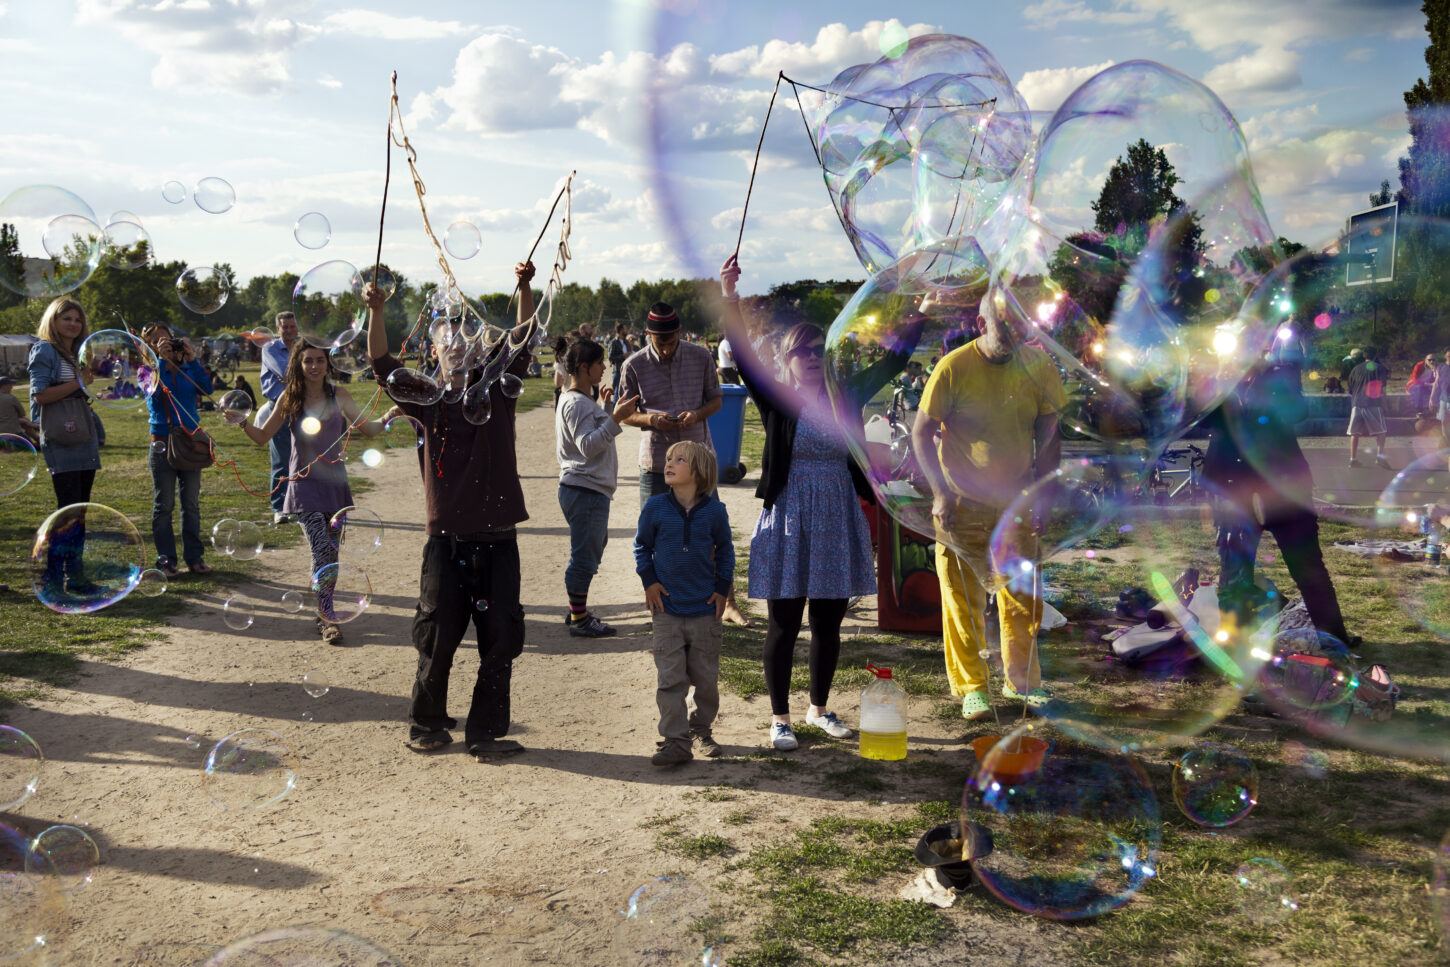 A group of people making giant soap bubbles on an early summer Sunday afternoon at Mauerpark, with the park's crowd scattered around them, some spectating.